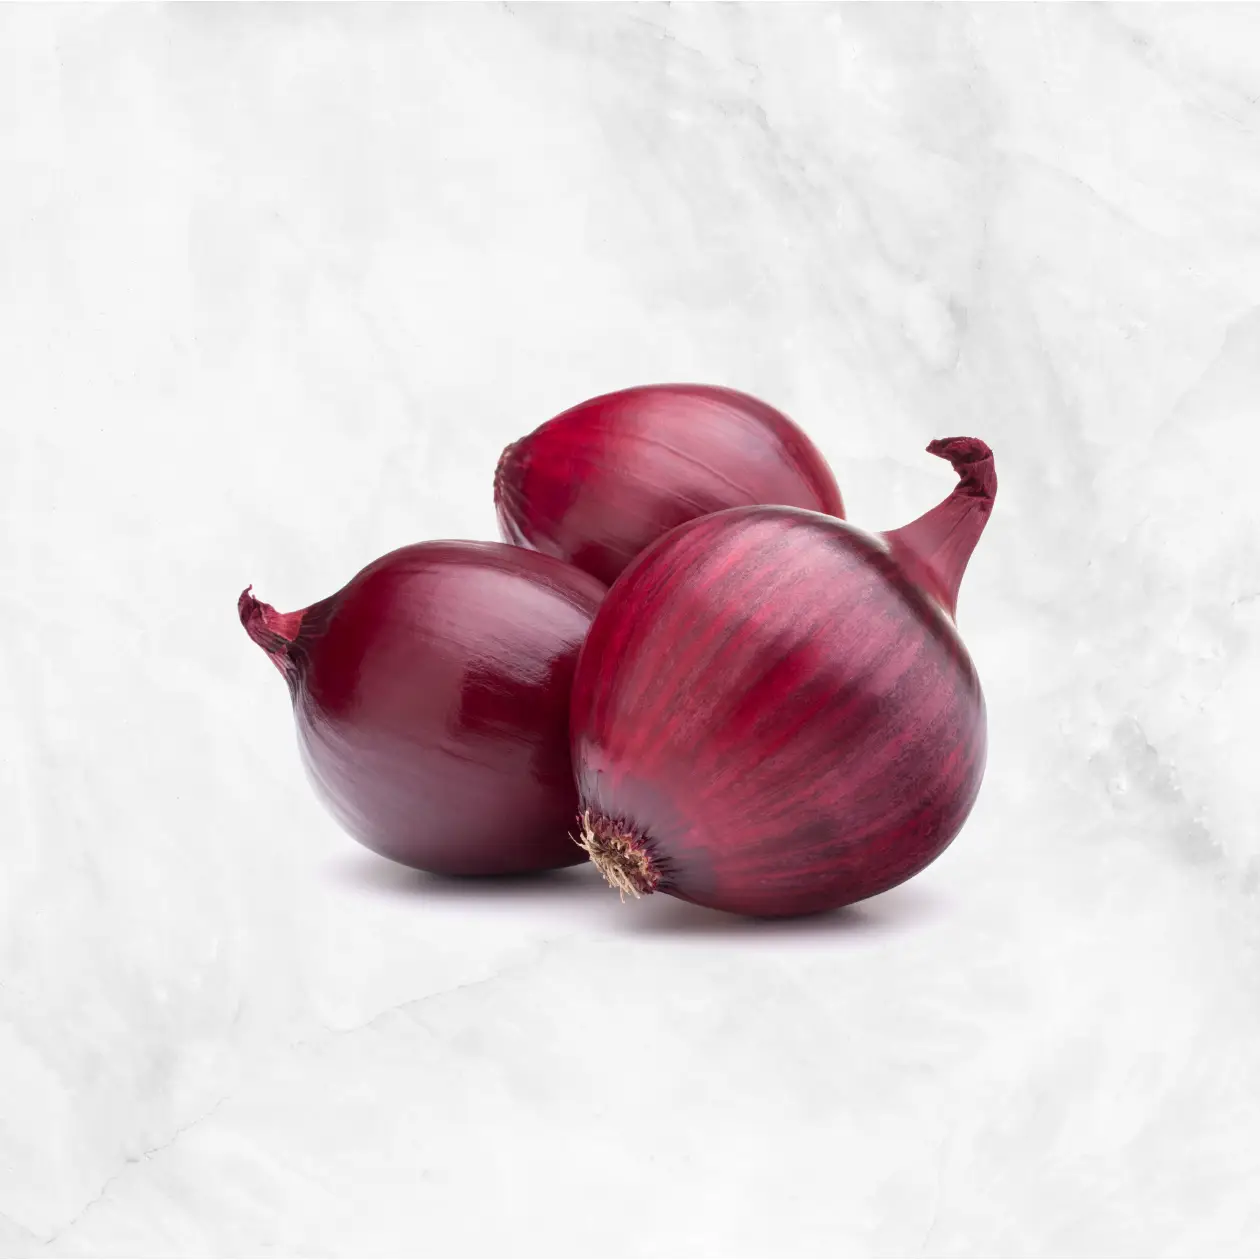 Organic Red Cabernet Onion Delivery